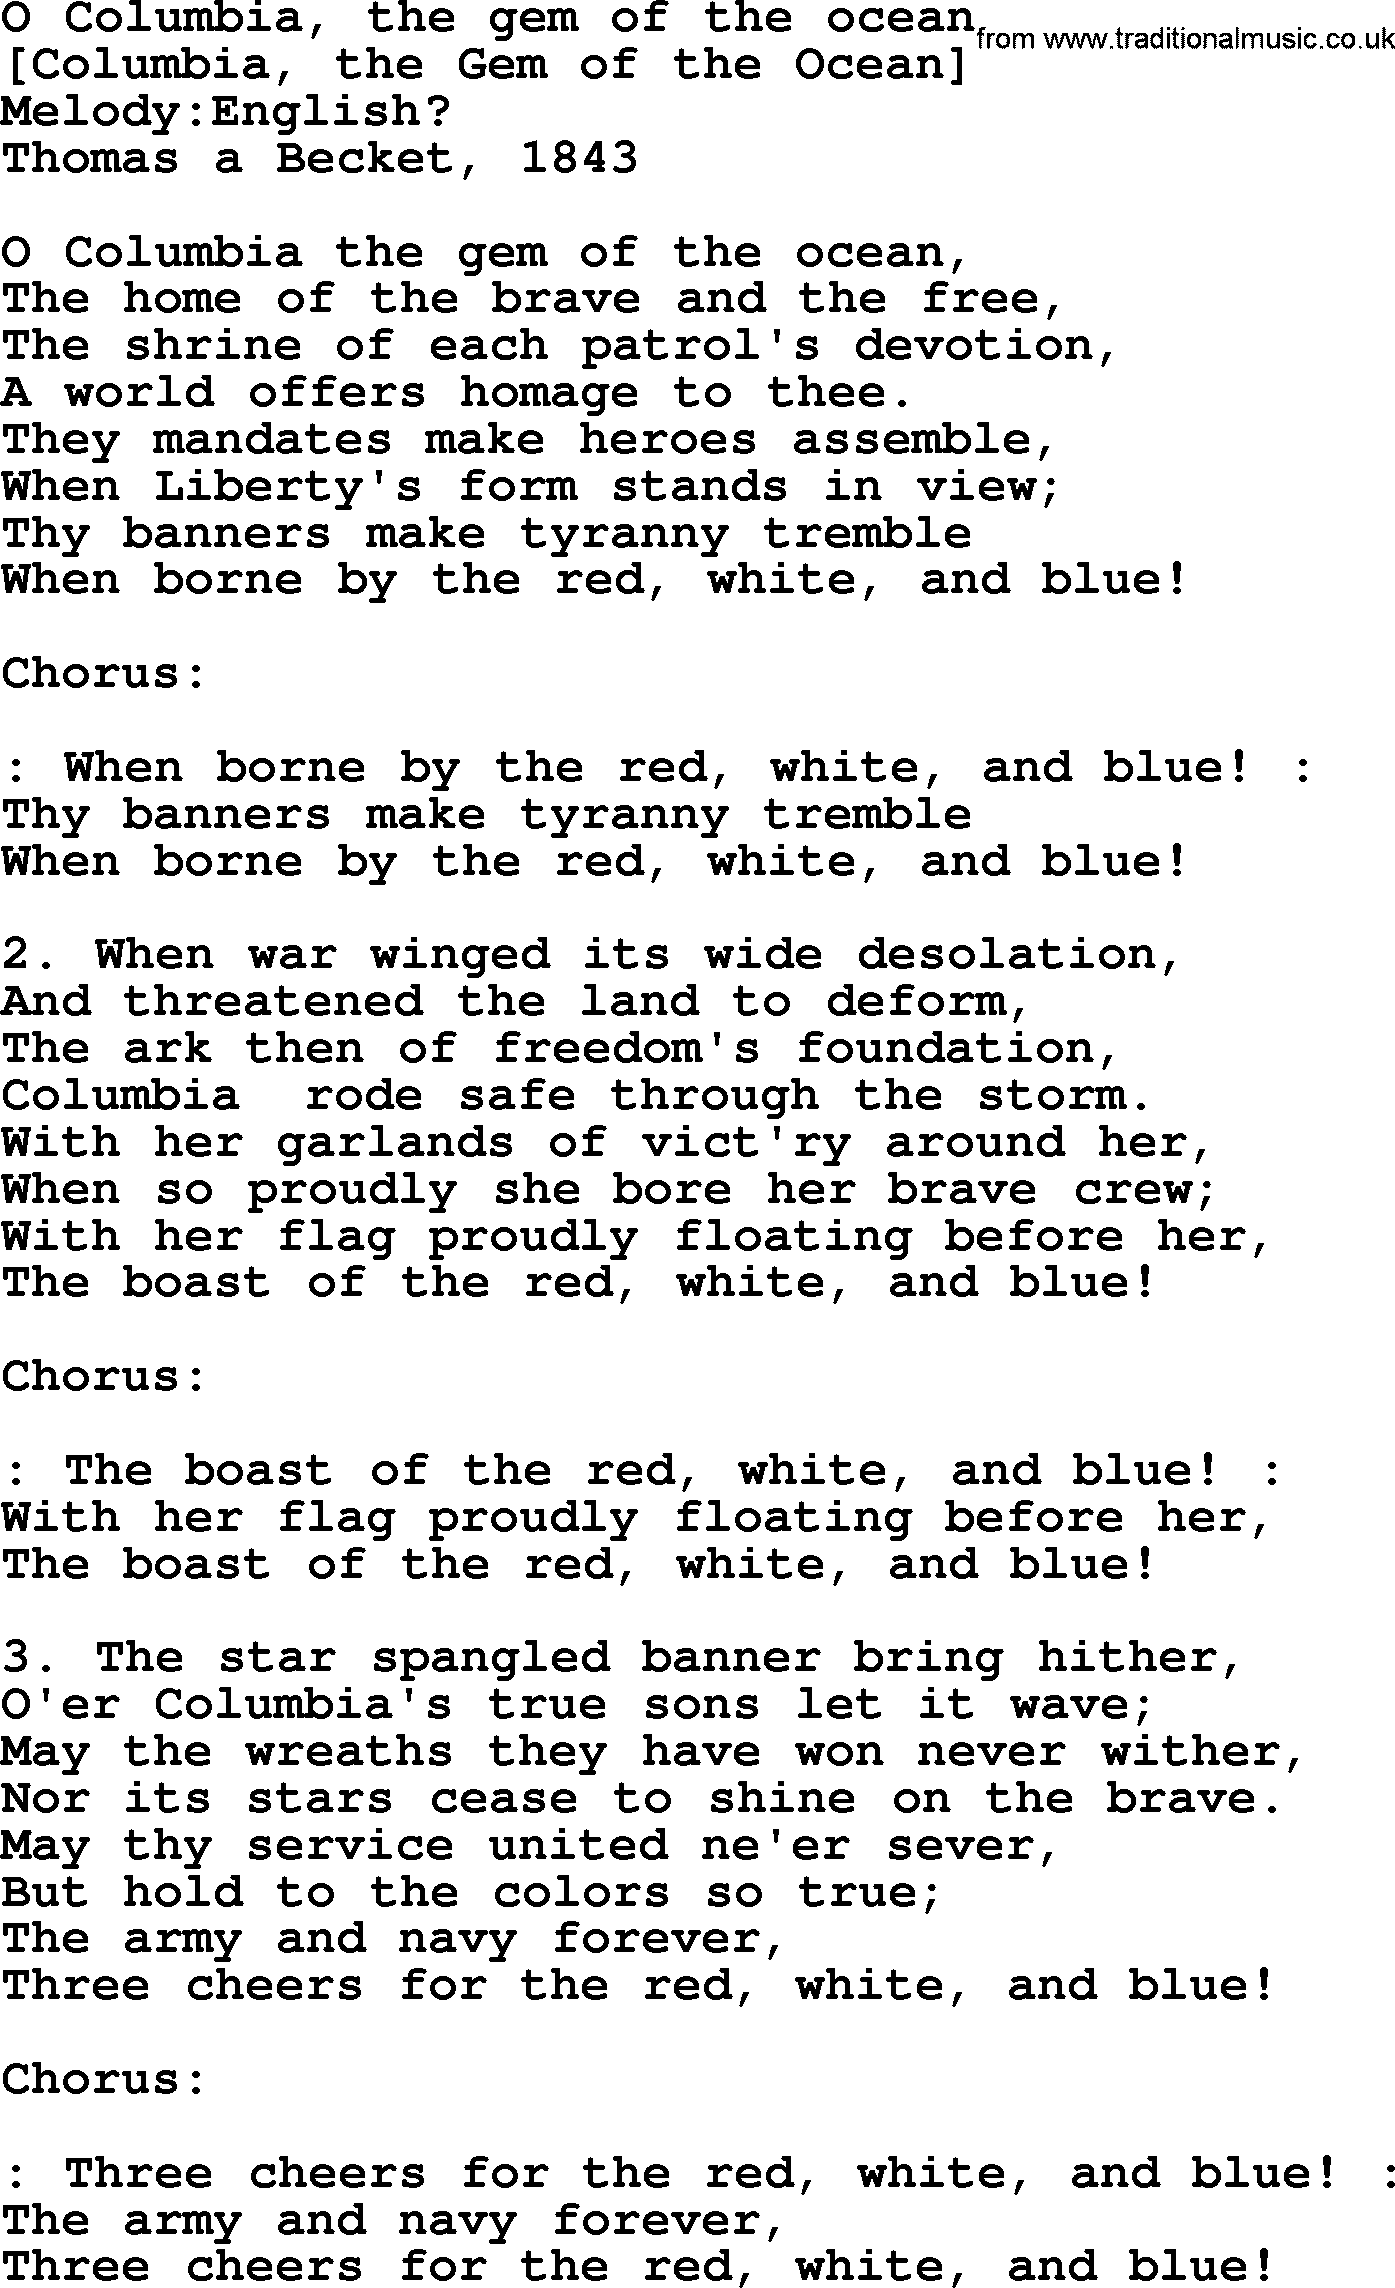 Old American Song: O Columbia, The Gem Of The Ocean, lyrics